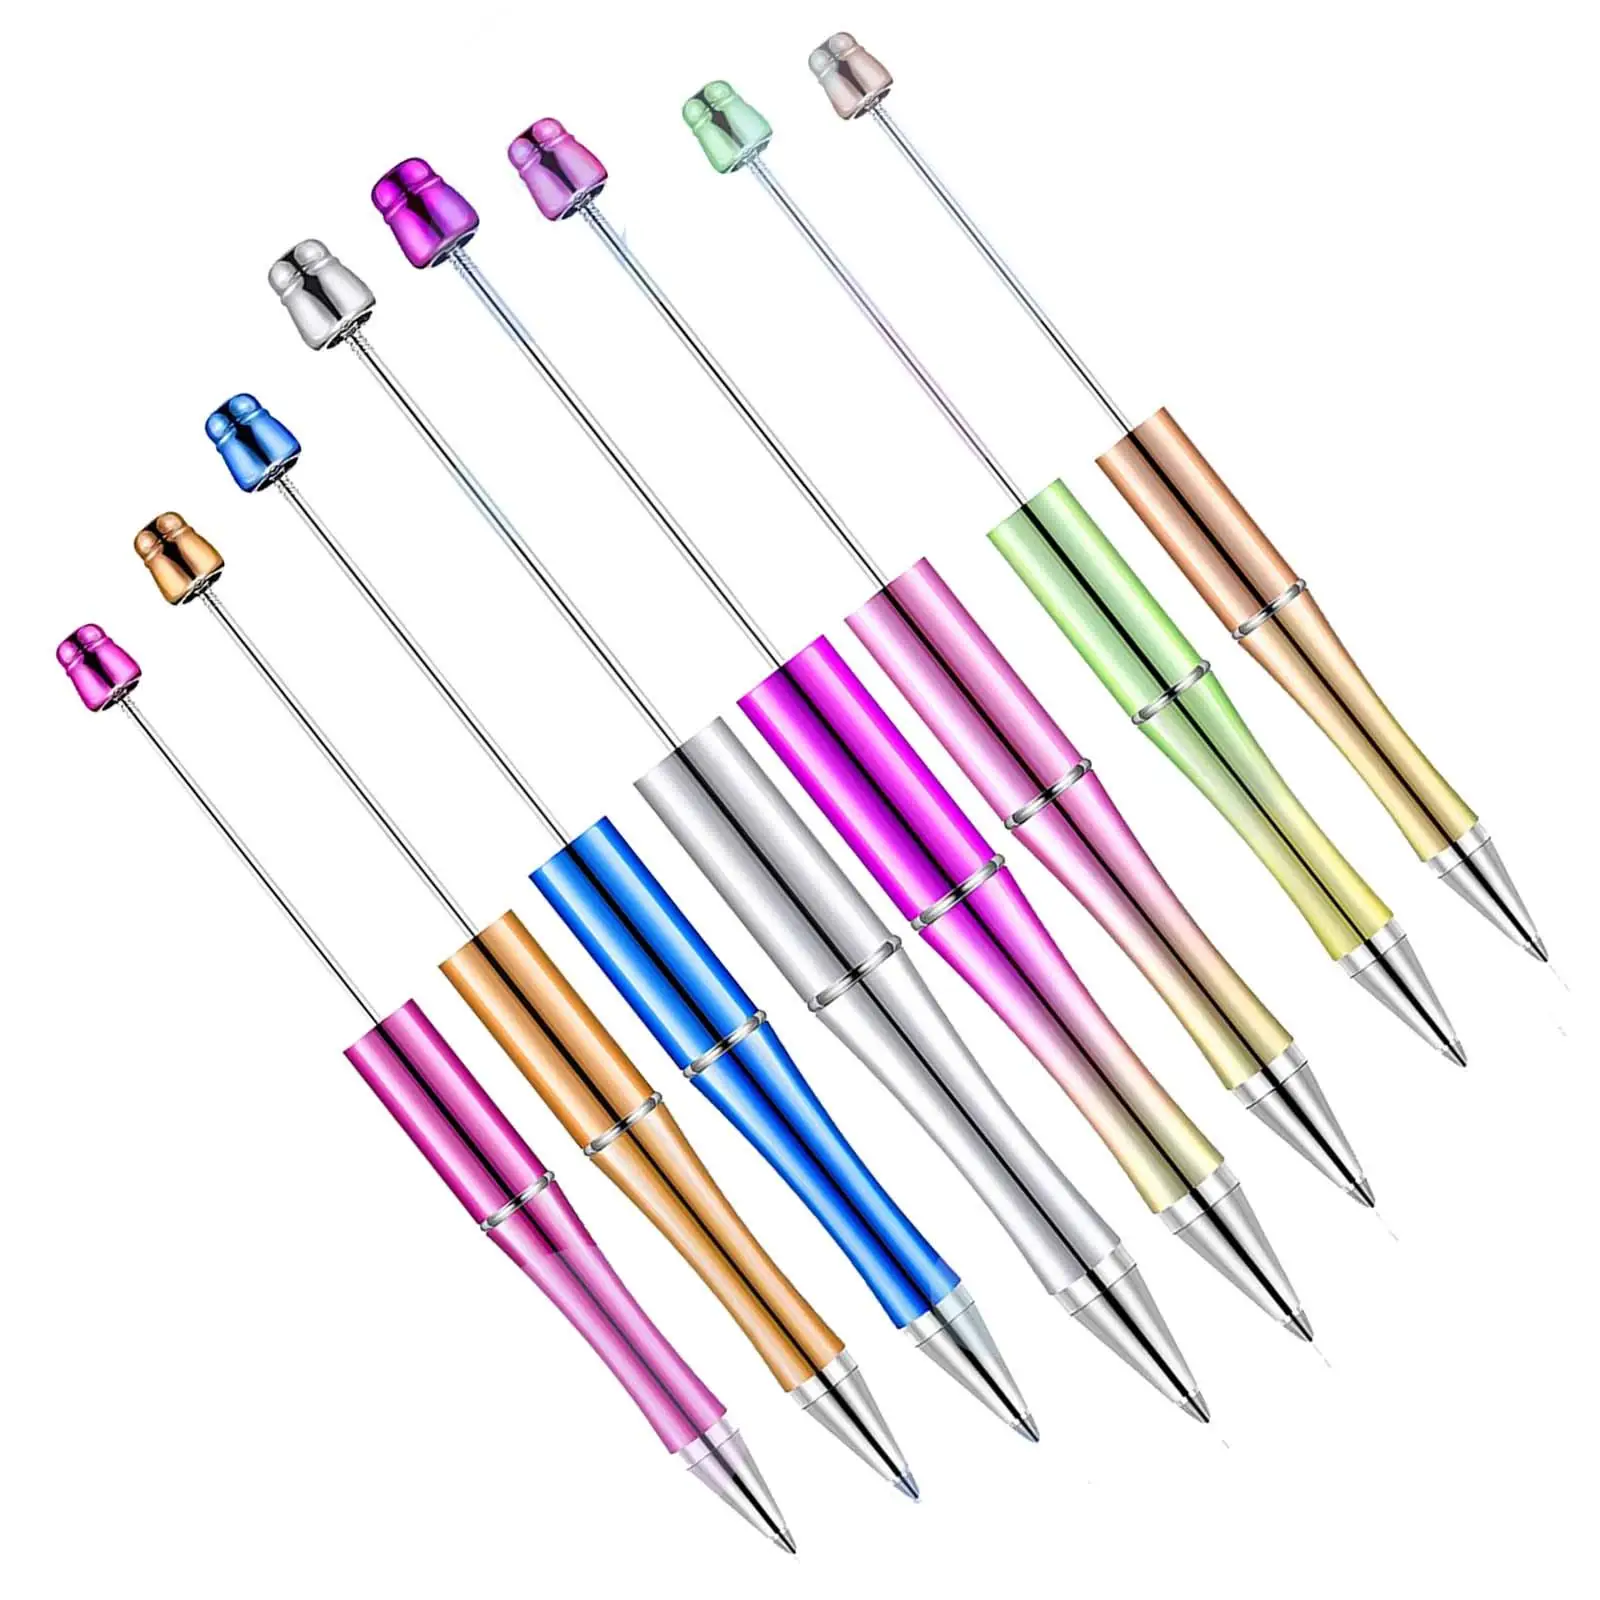 

8x Rollerball Pen Art Drawing Ball Pen Portable Creative DIY Assorted Colors Bead Pens for Office Taking Notes Exam Draw Writing